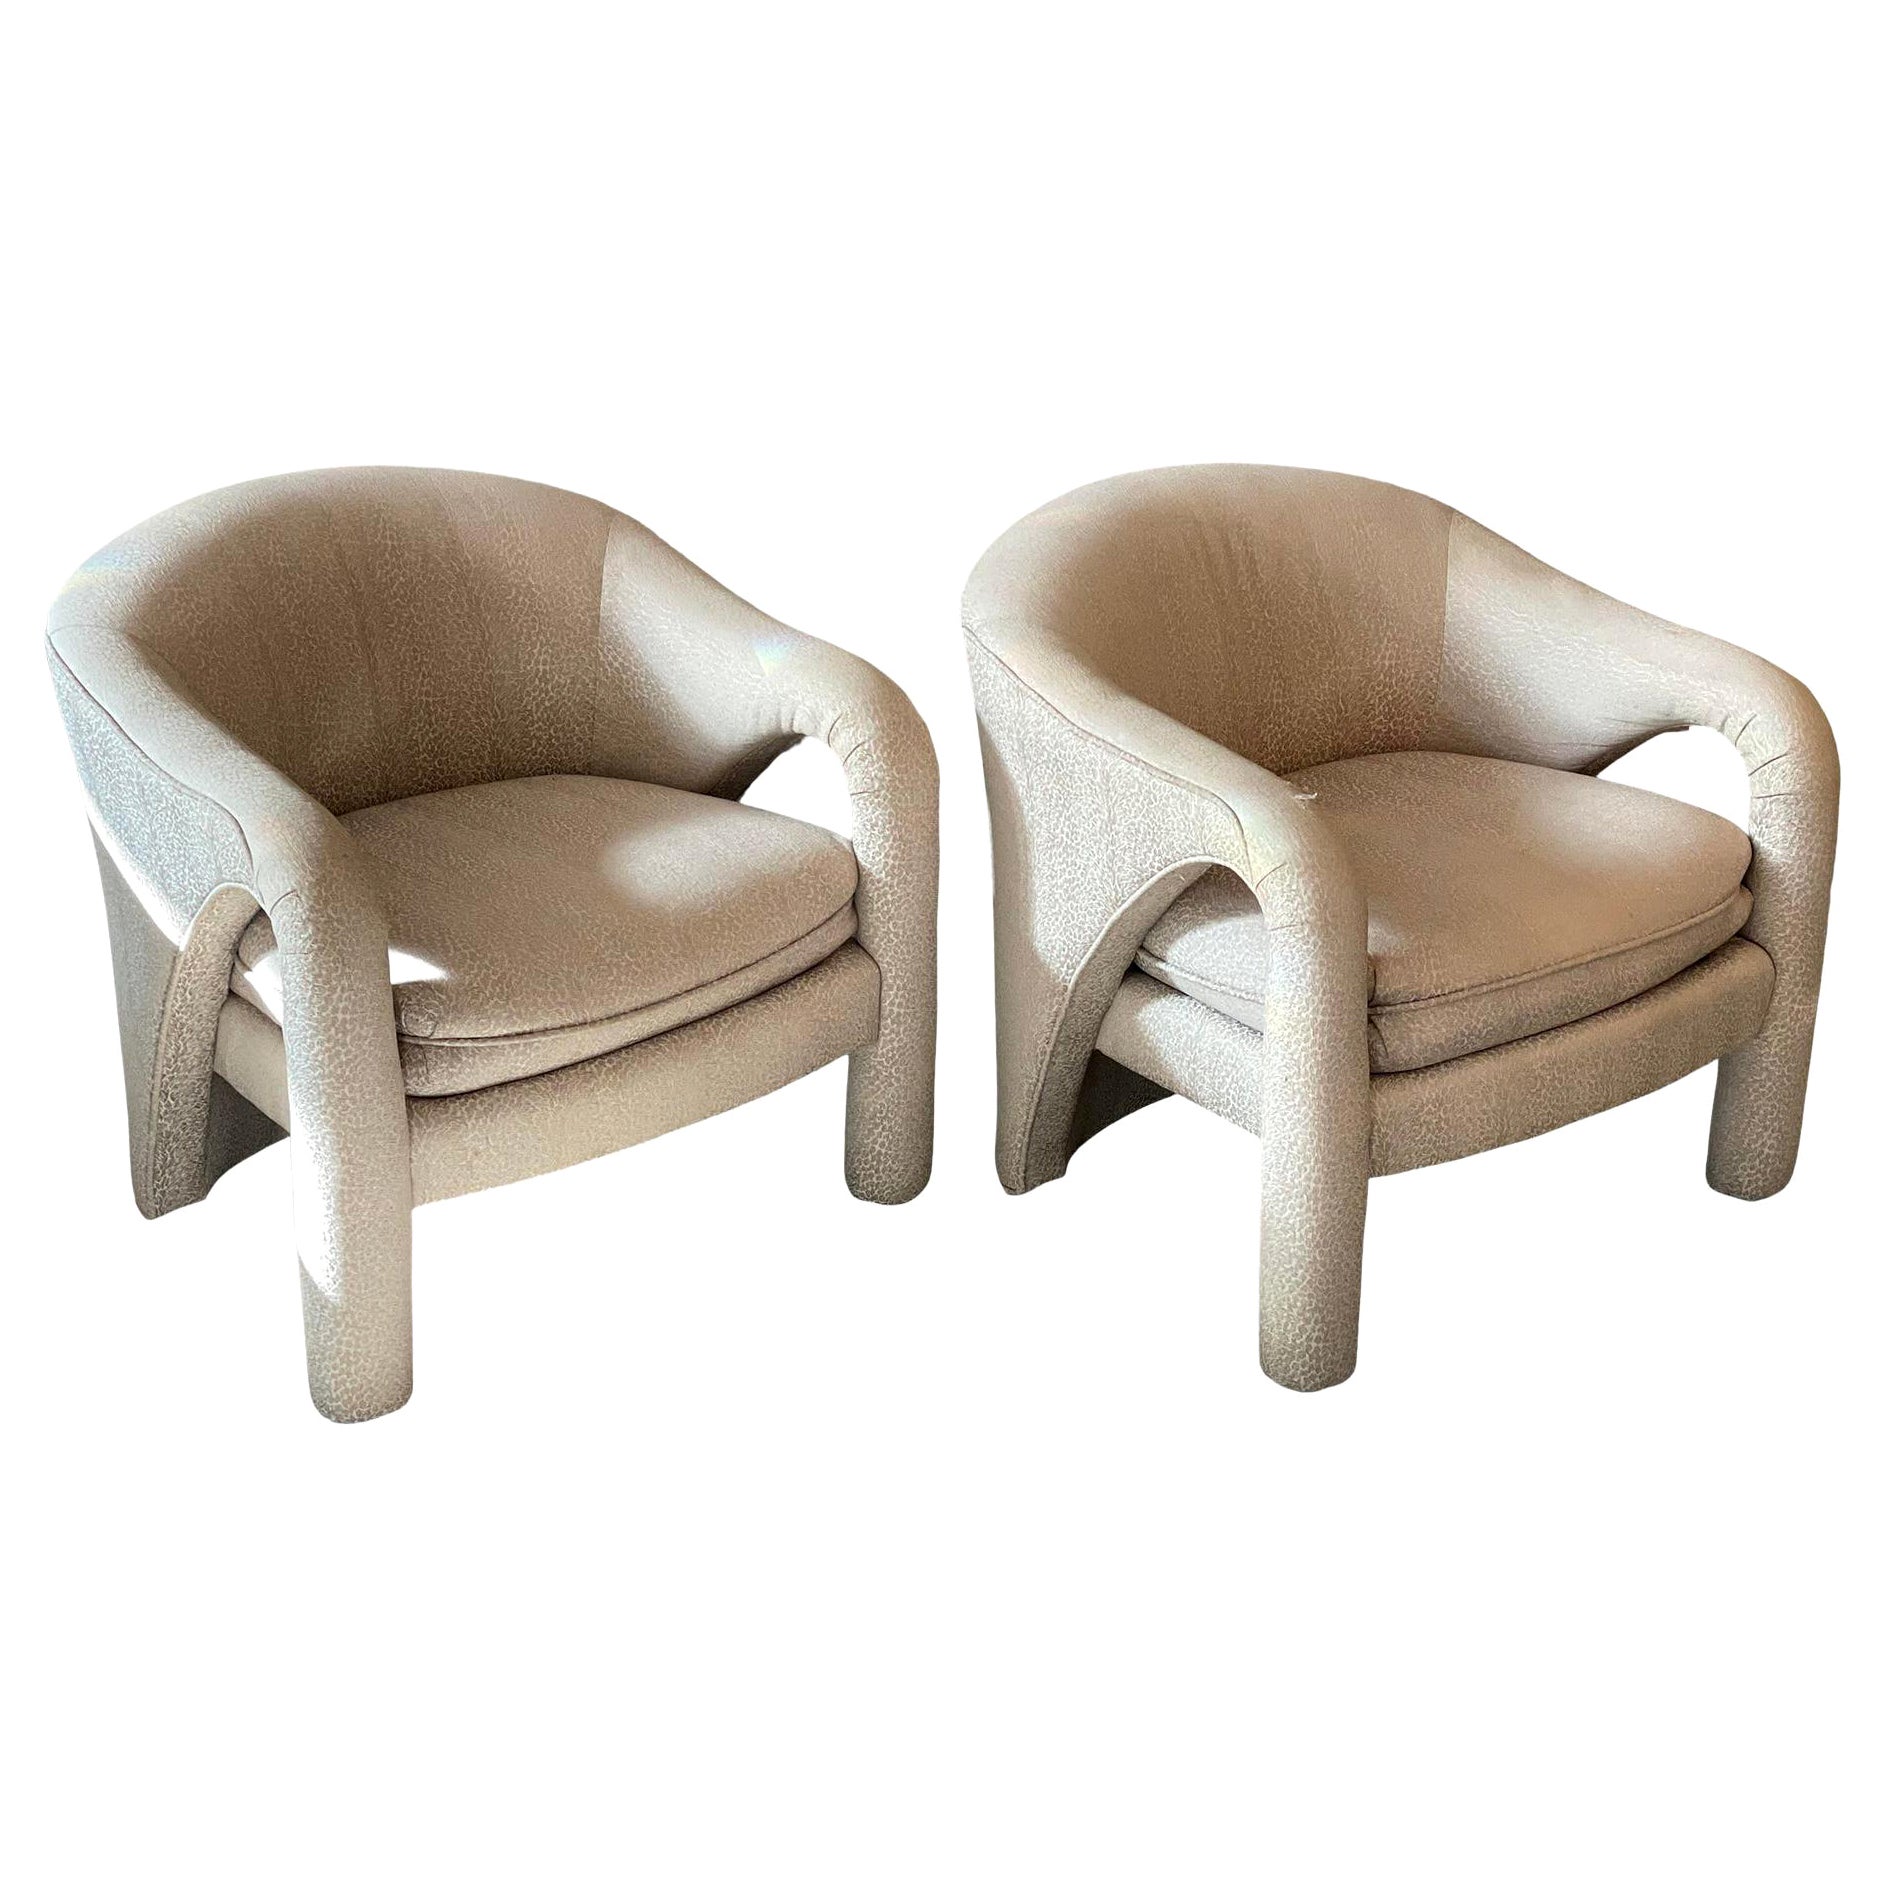 1980s Postmodern Sculptural Arc Chairs in Beige Upholstery, a Pair For Sale